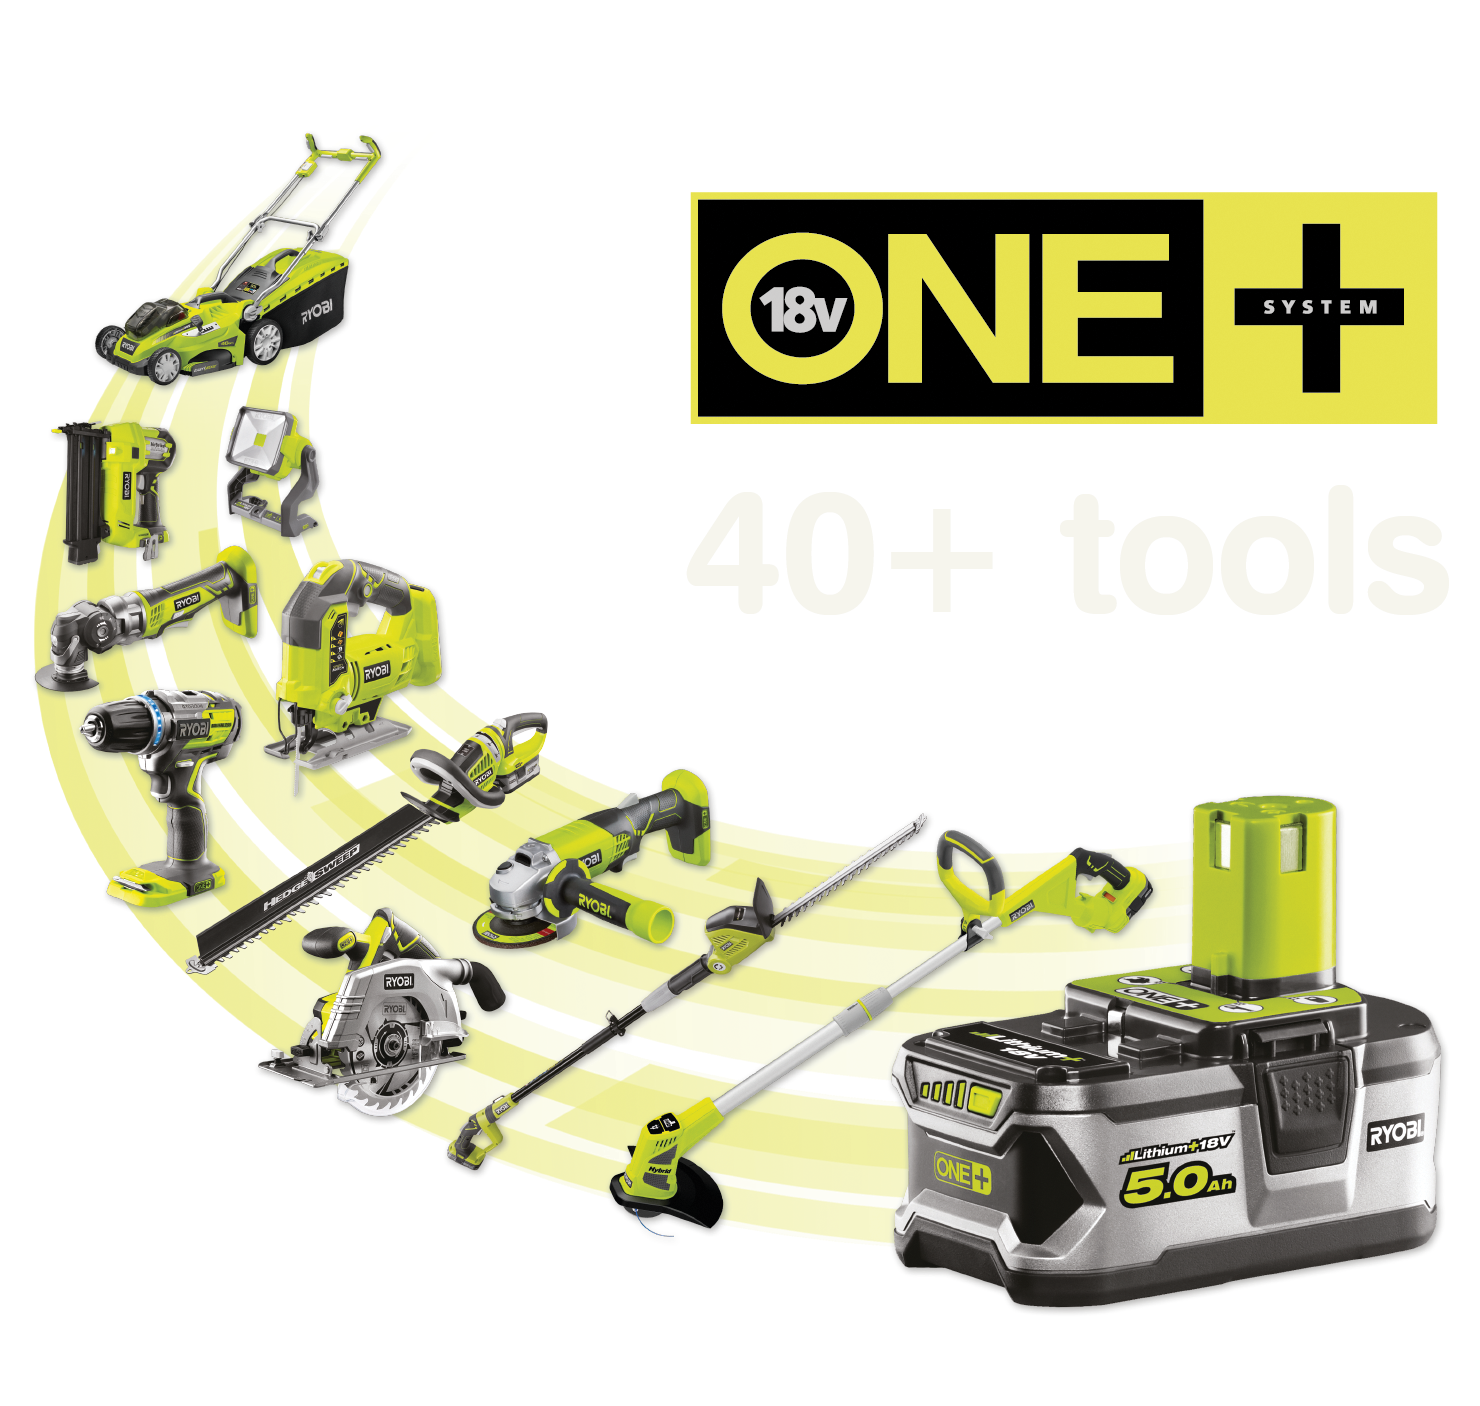 Over 40+ tools powered by the same ONE+ battery